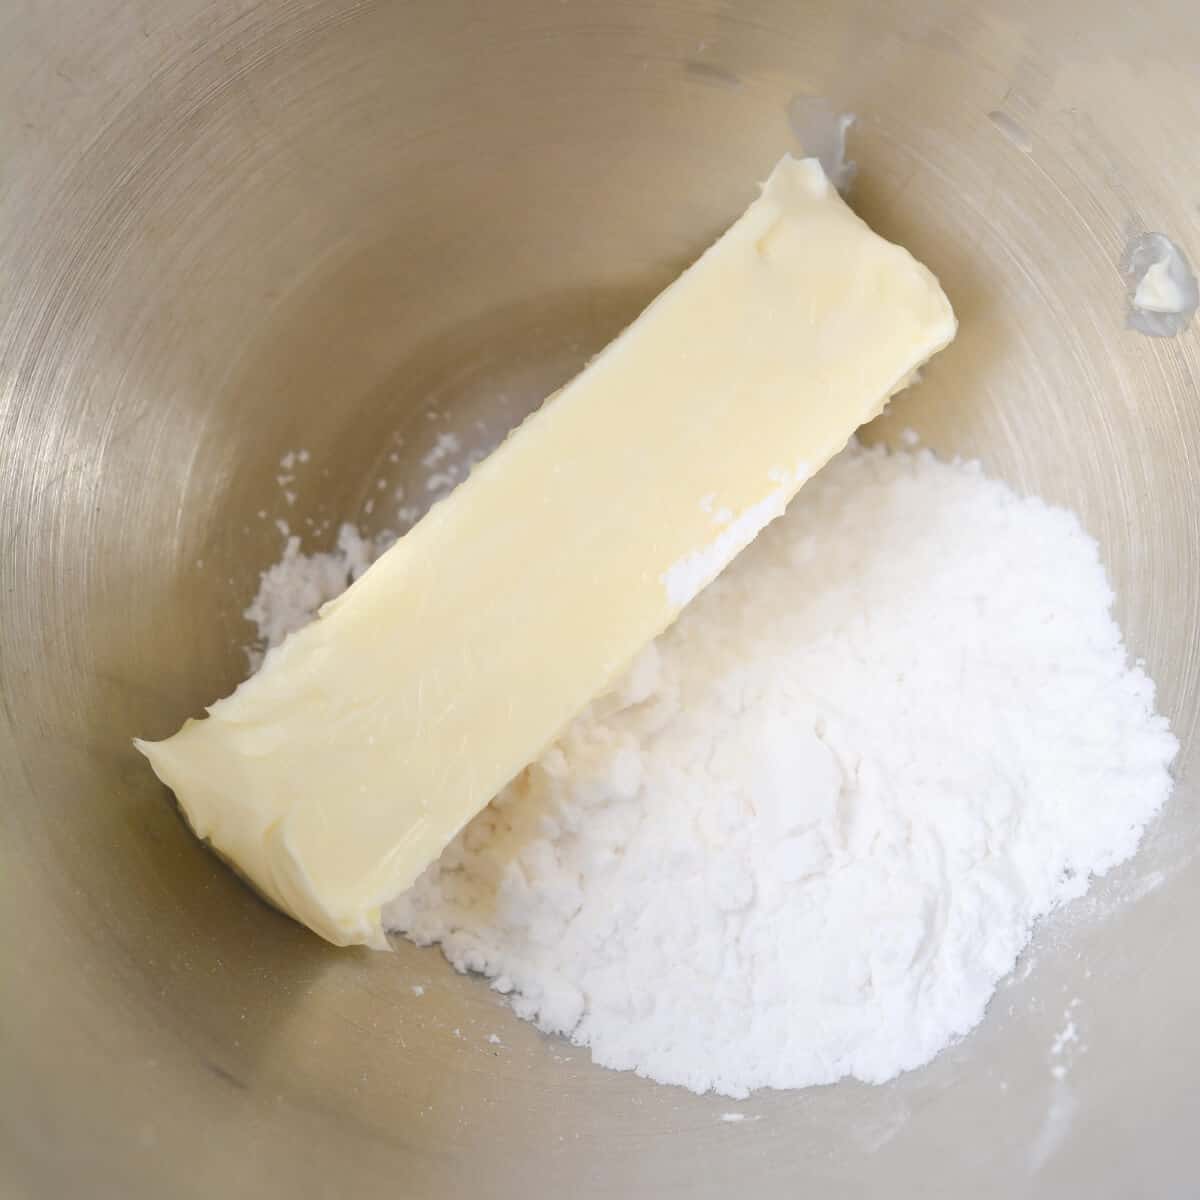 unsalted butter and sweetener in mixing bowl